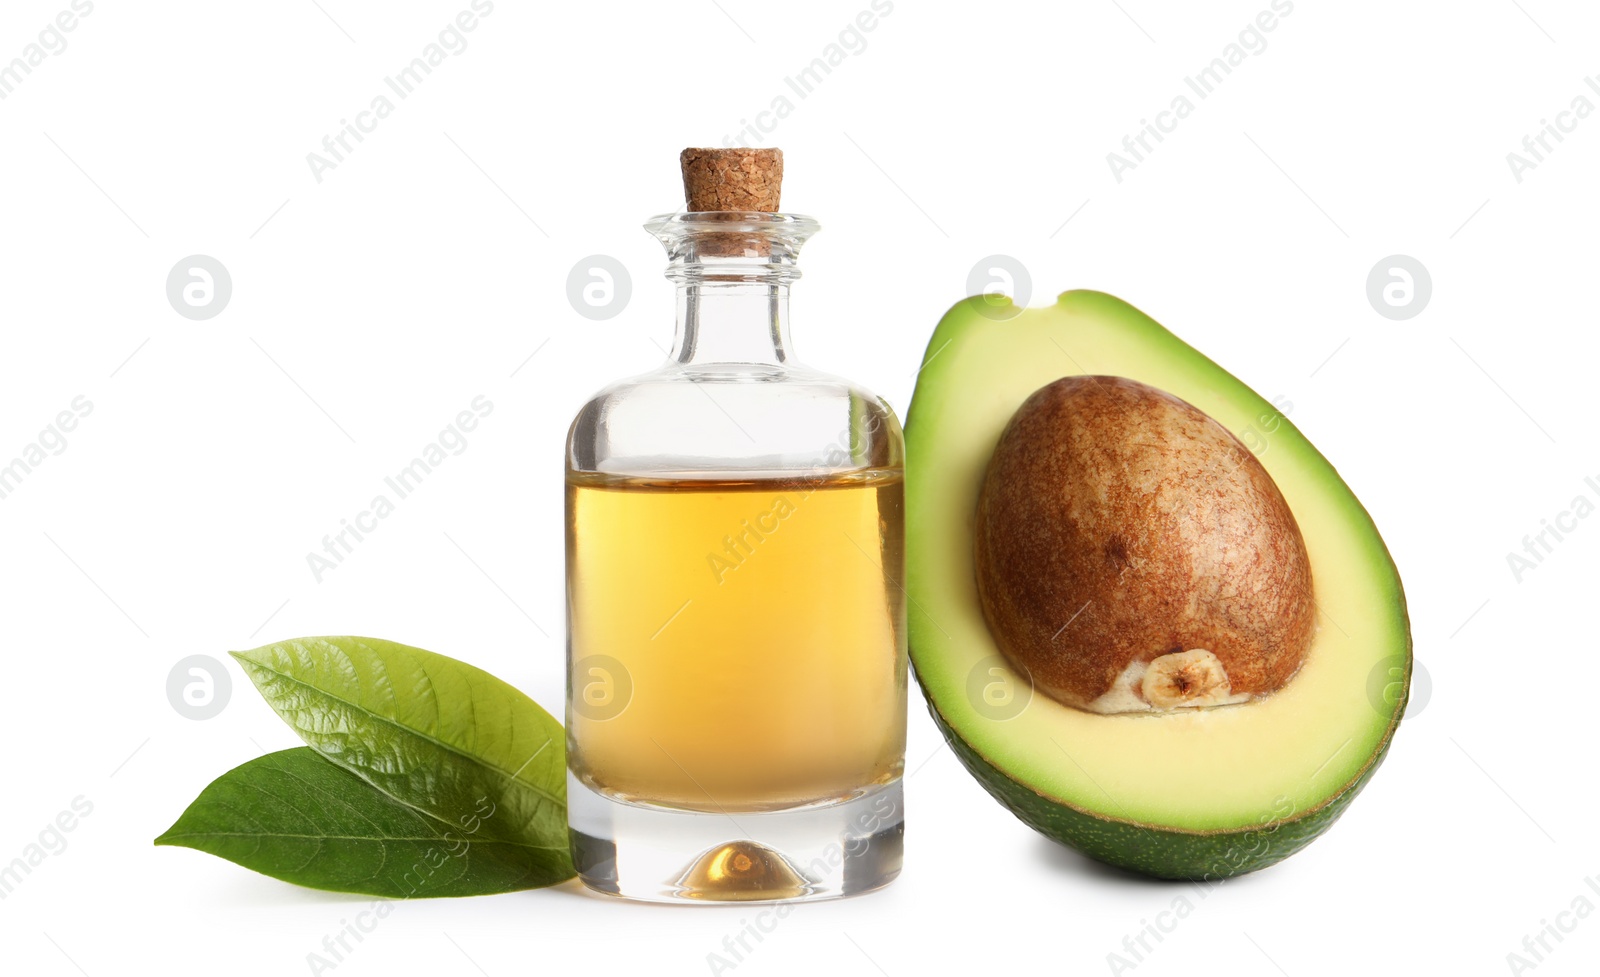 Photo of Bottle of essential oil, avocado and leaves on white background